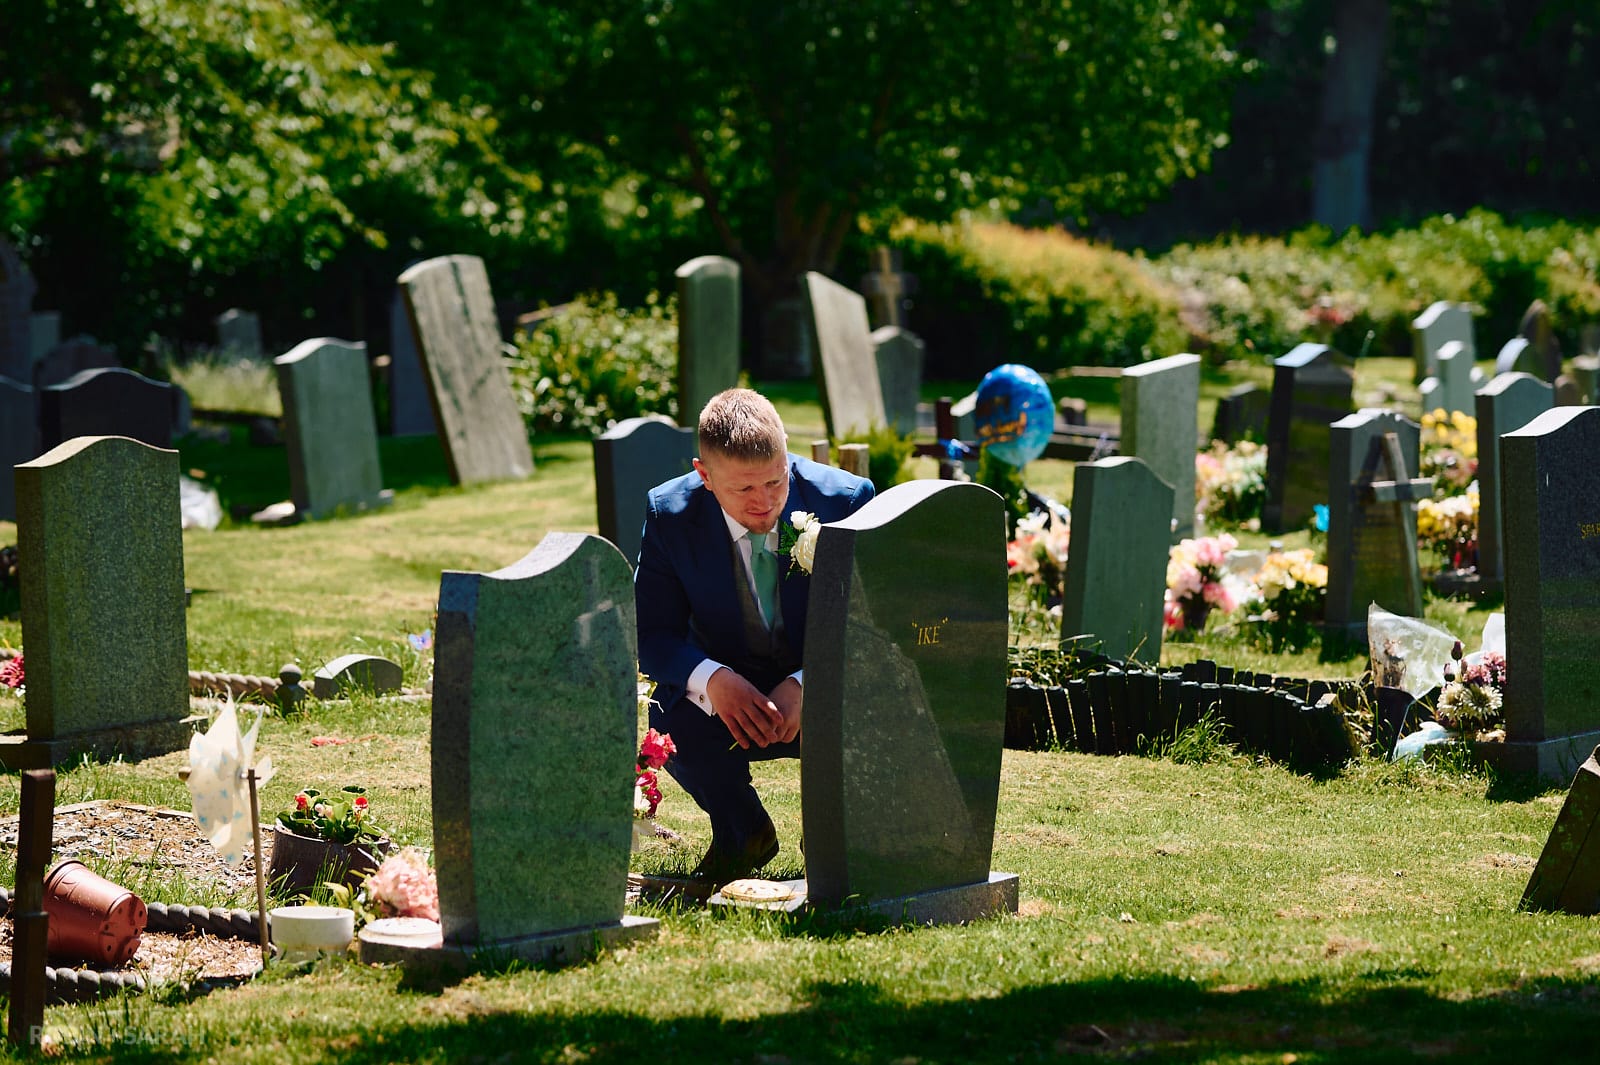 Groom visits grave of grandfather in churchyard before wedding